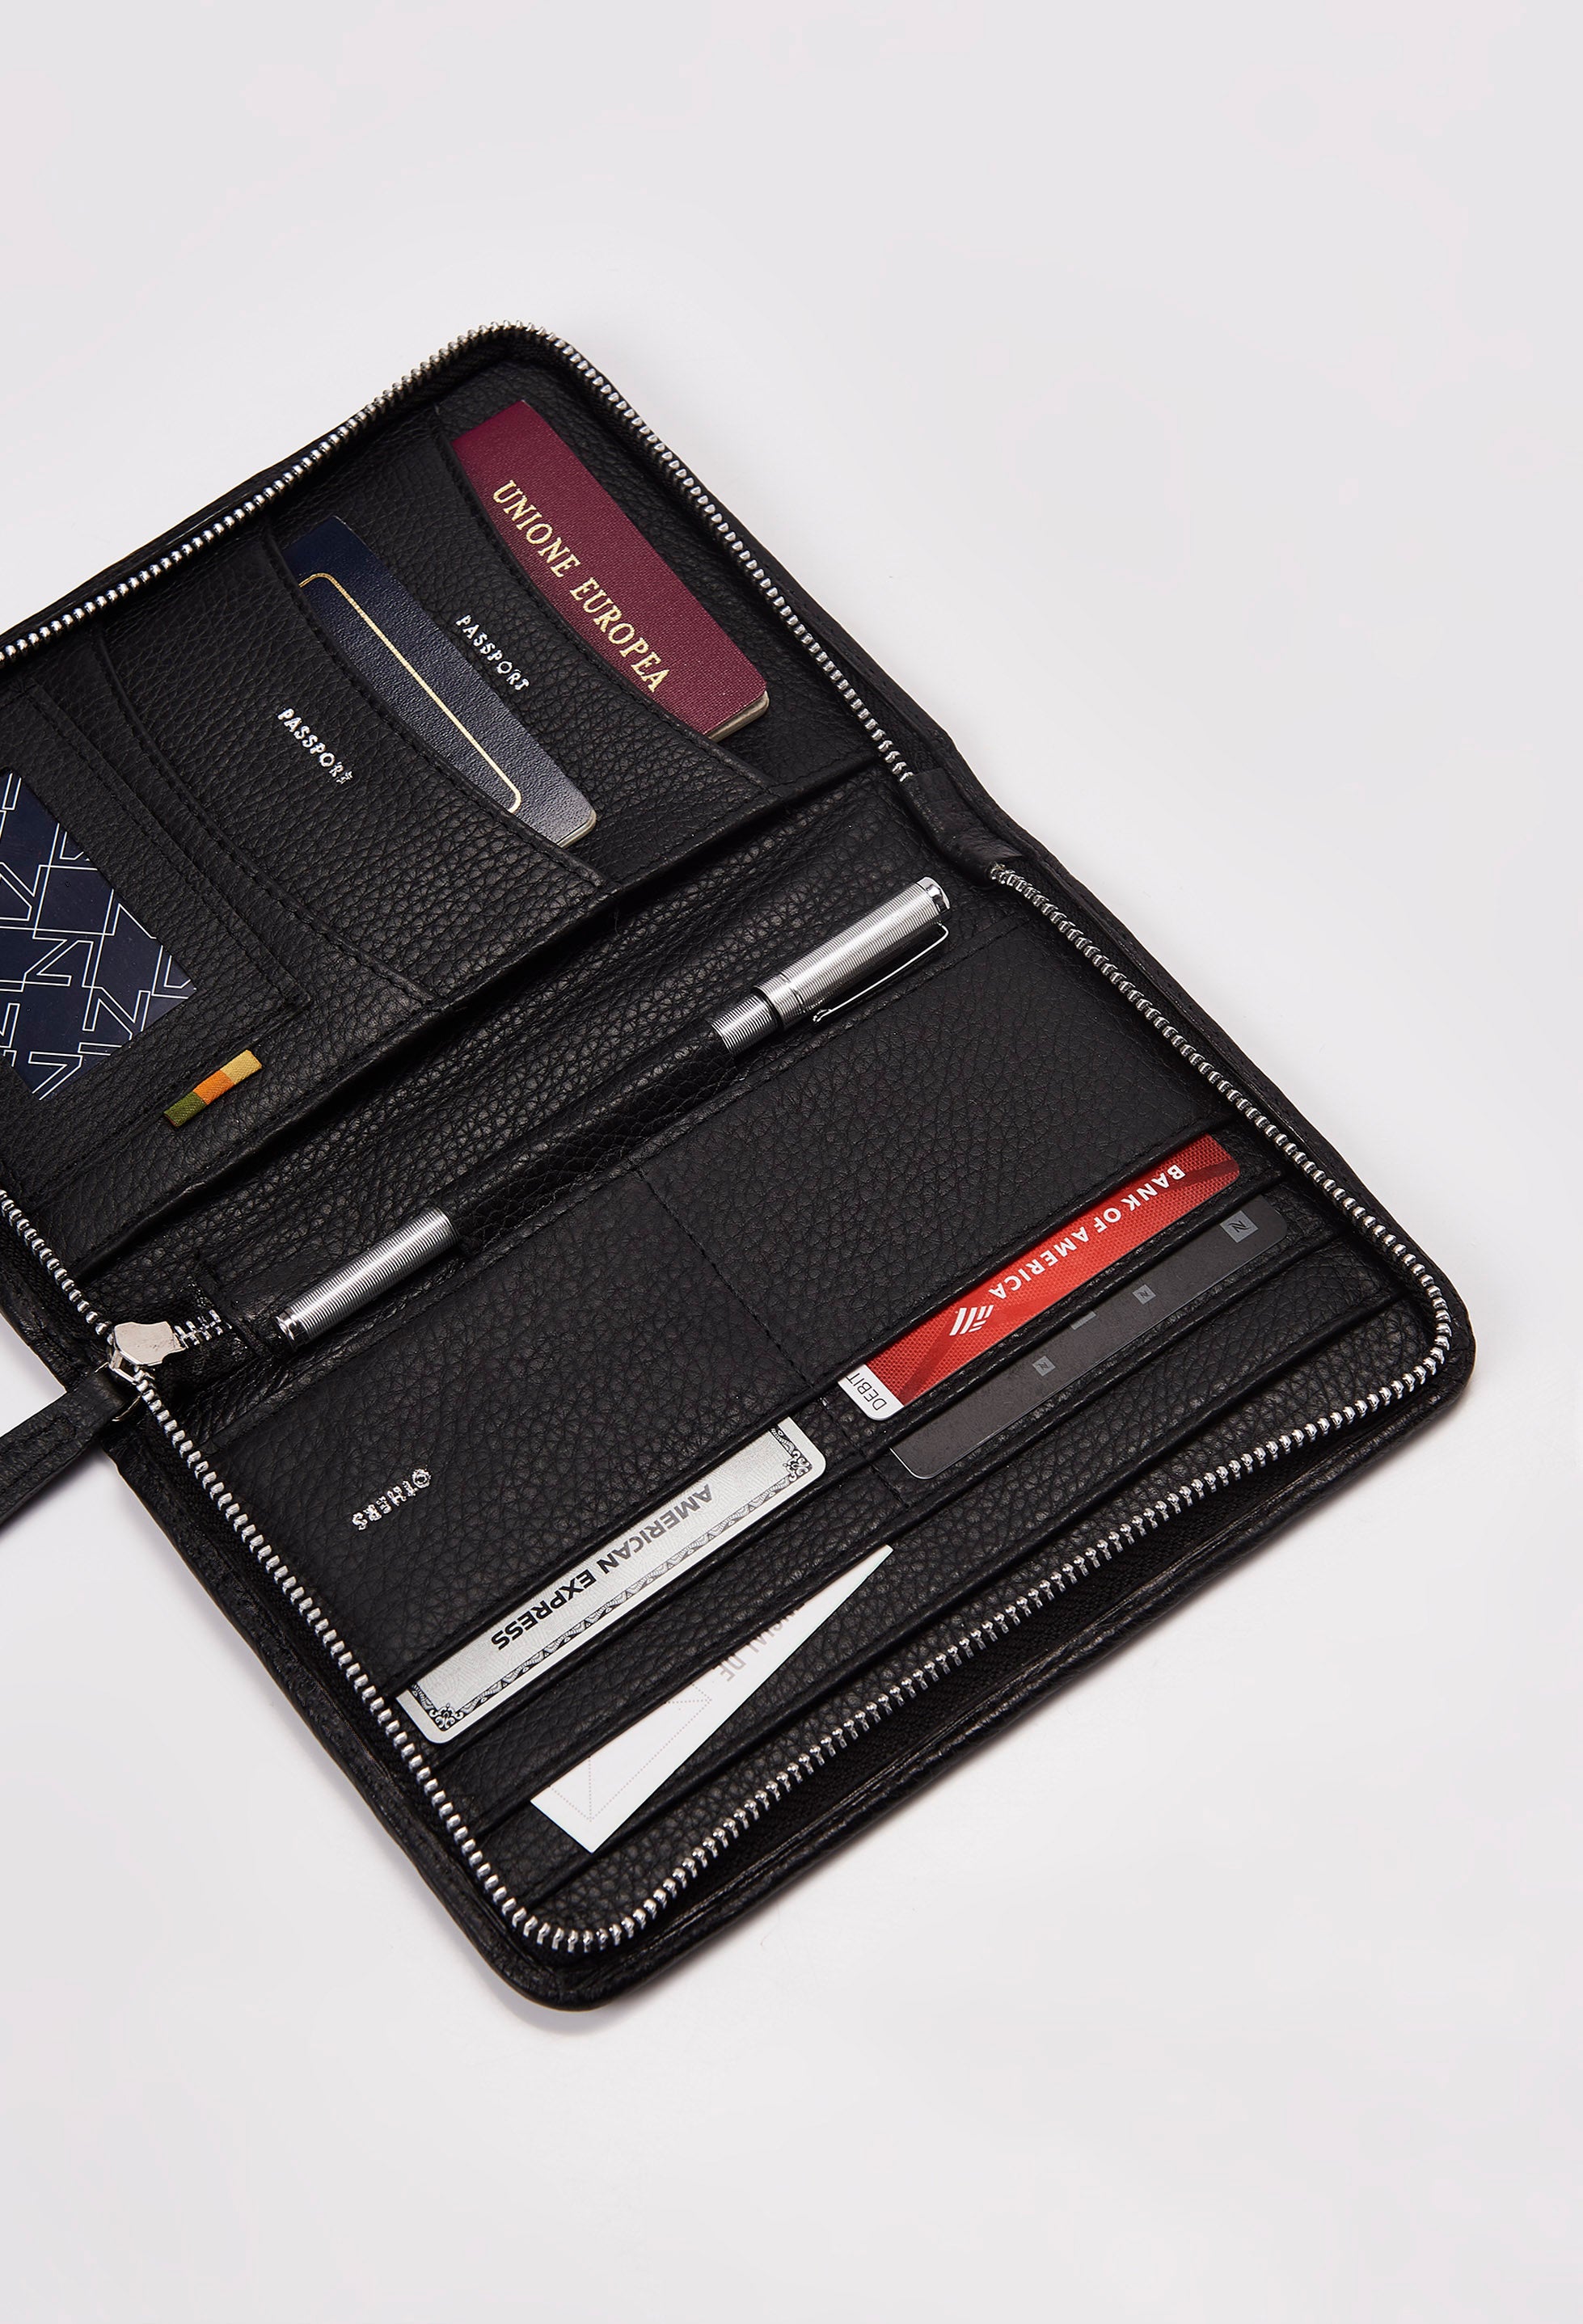 Interior of a Black Leather Passport Holder featuring labeled compartments for multiple passports, credit cards, personal cards and a pen.